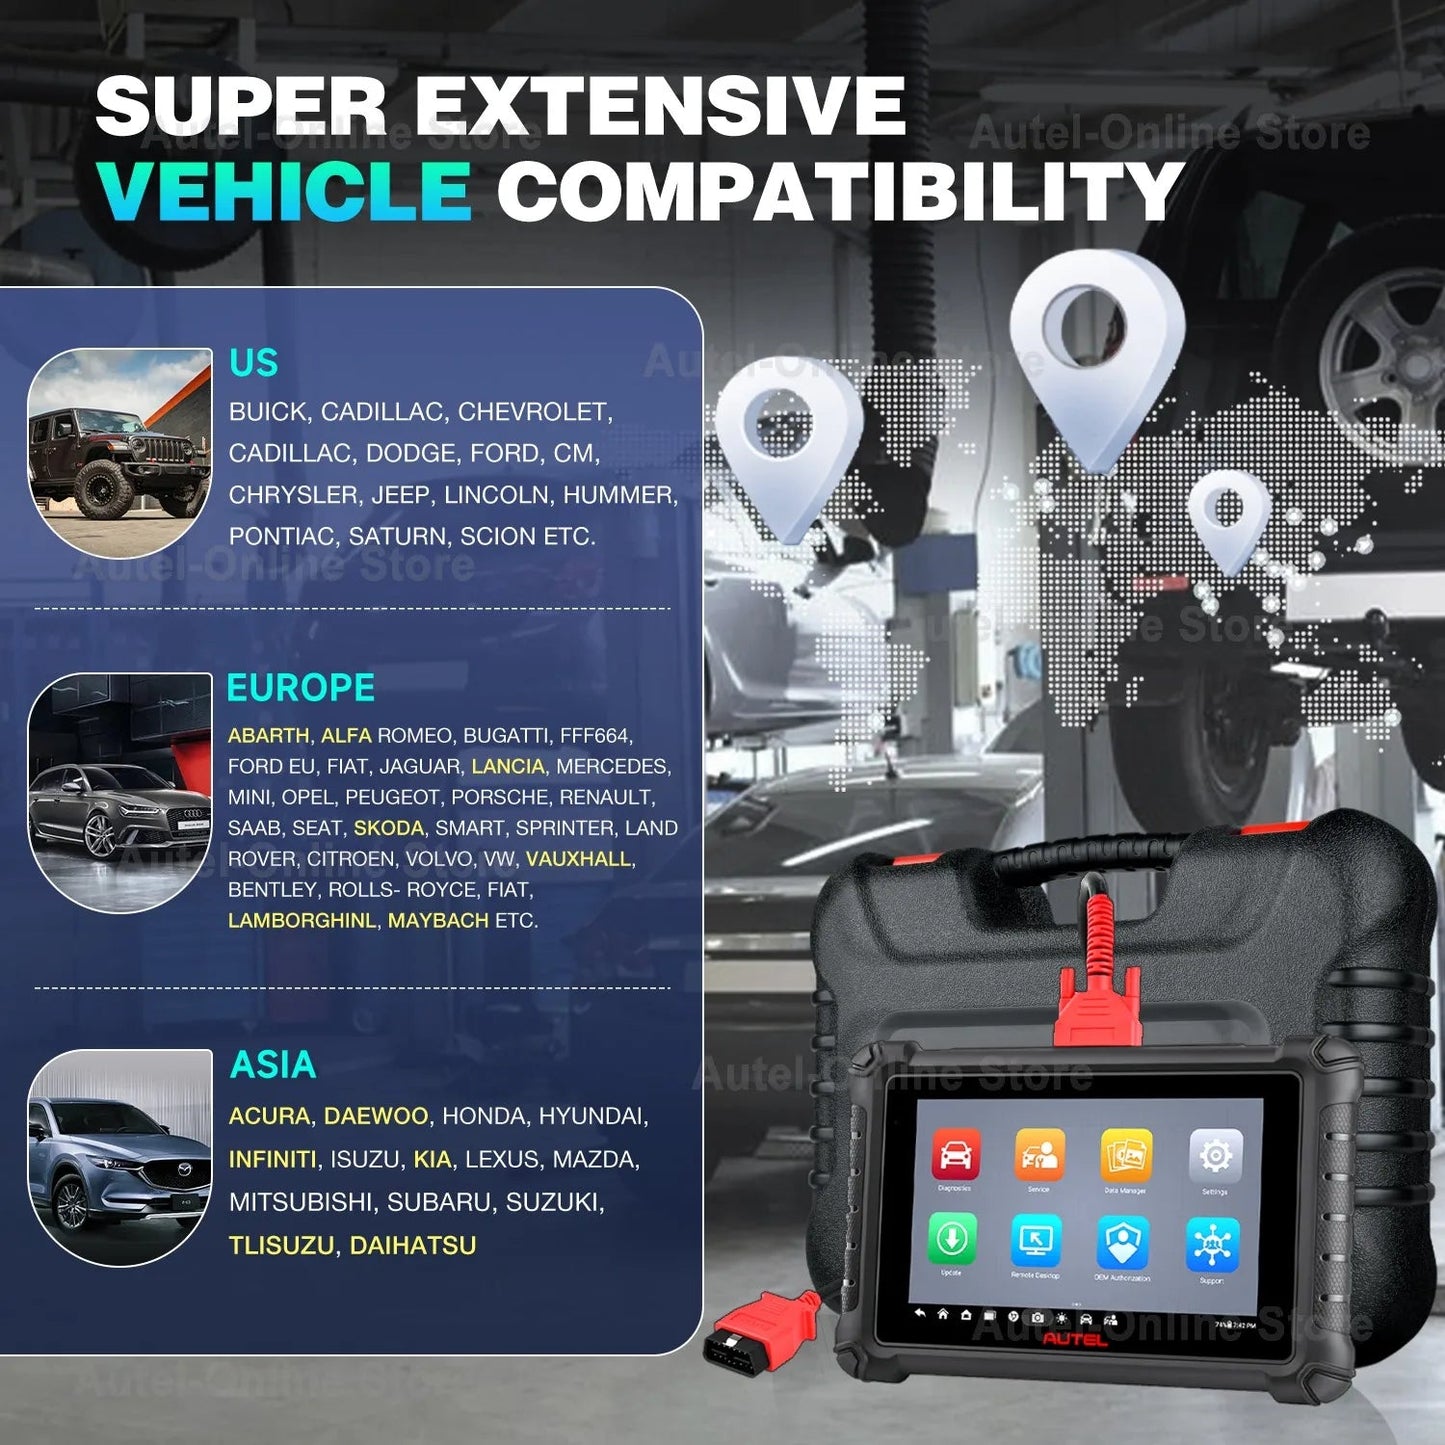 Autel MaxiPro MP900 Diagnostic Scanner CAN FD & DoIP Scan Tool Supports ECU Coding, Refresh Hidden, OBD2 All System Diagnostic - Dynamex